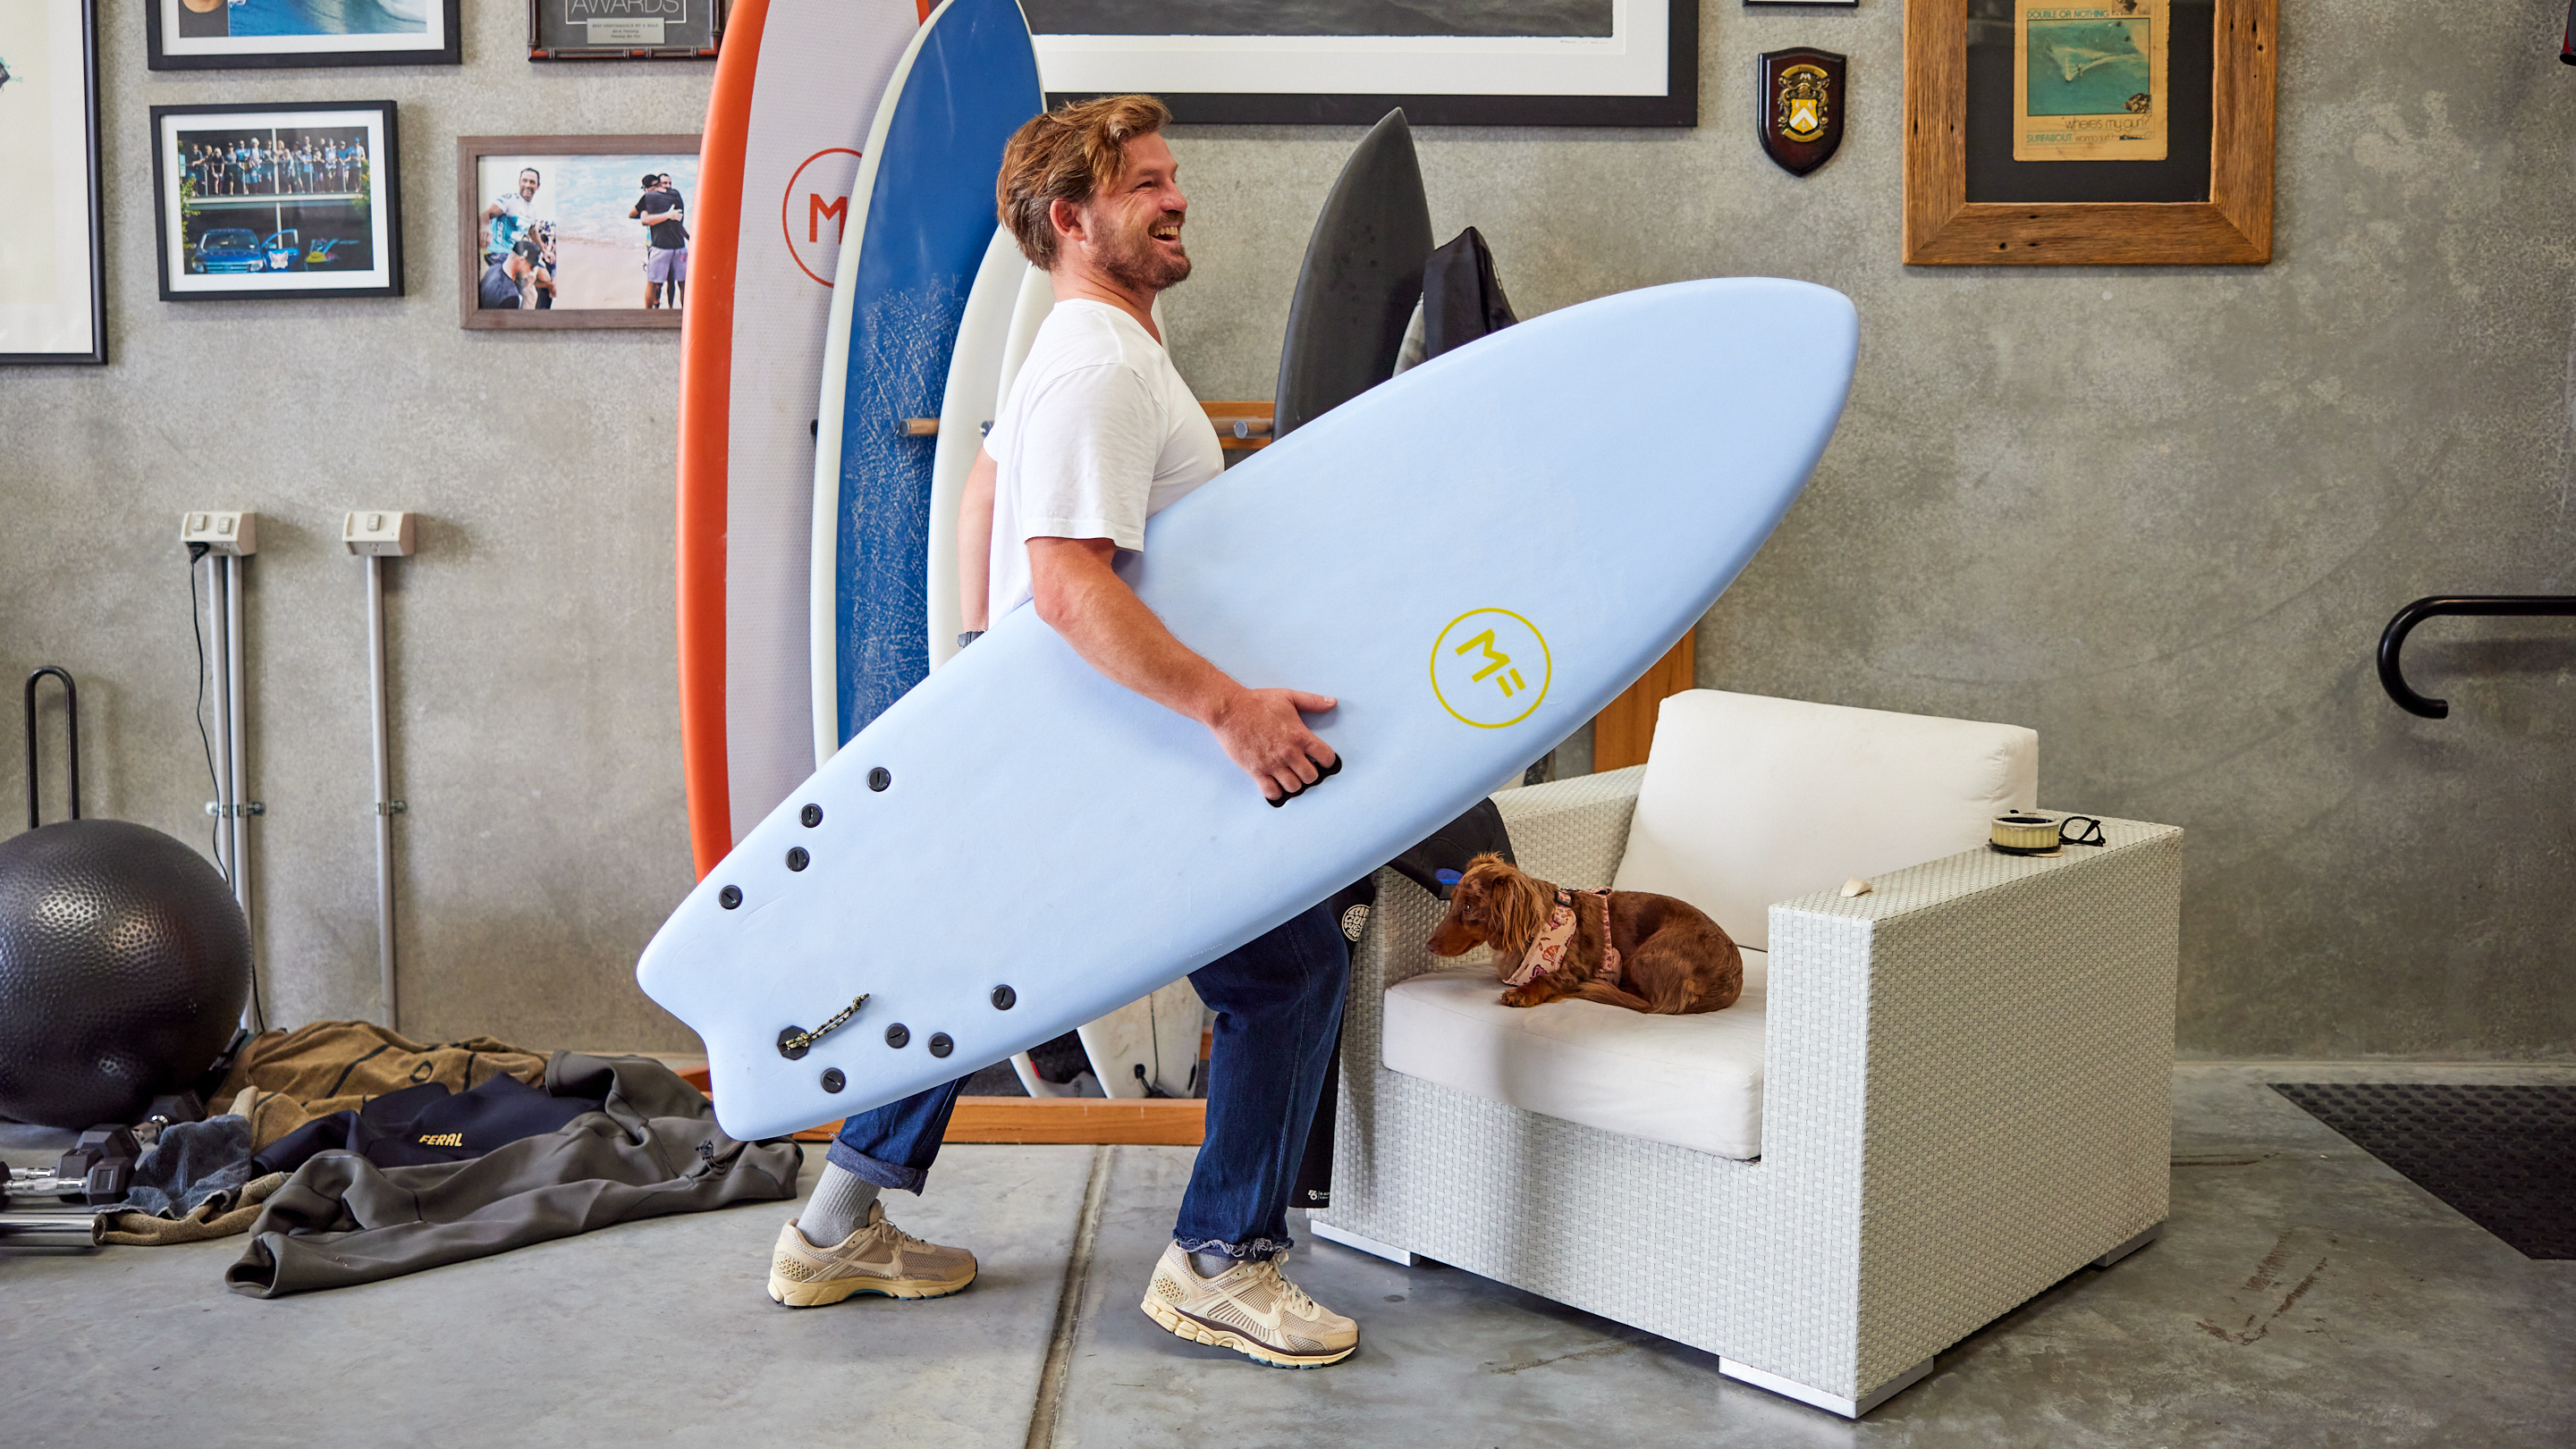 paars Springplank Sport Surfboard Review: MF Softboards Catfish Super Soft